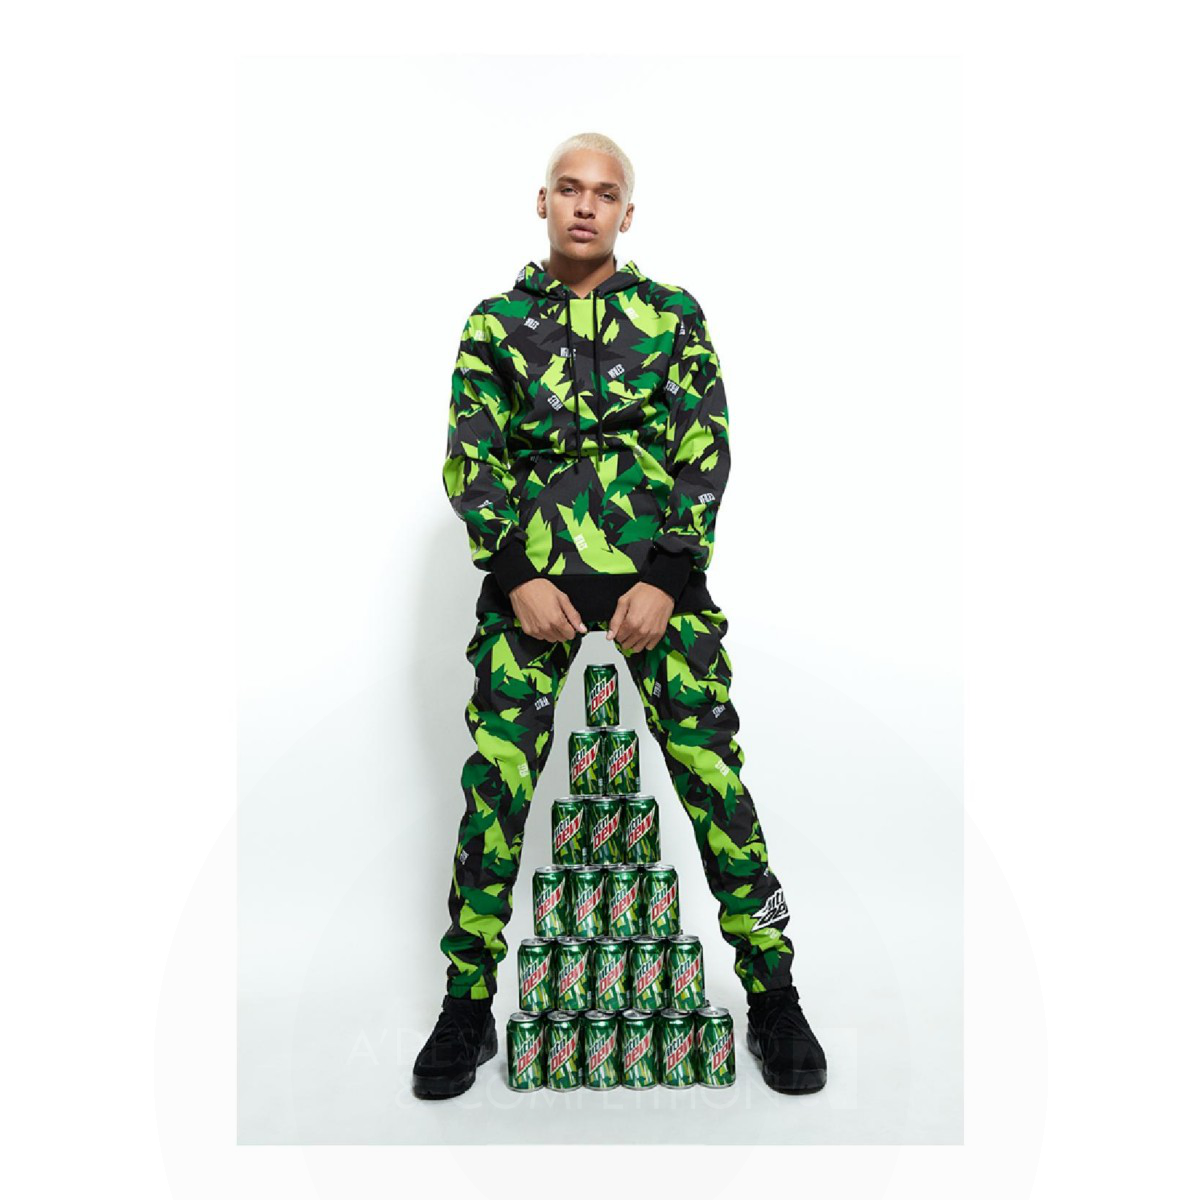 Camo Out  Wearable technology by PepsiCo Creator